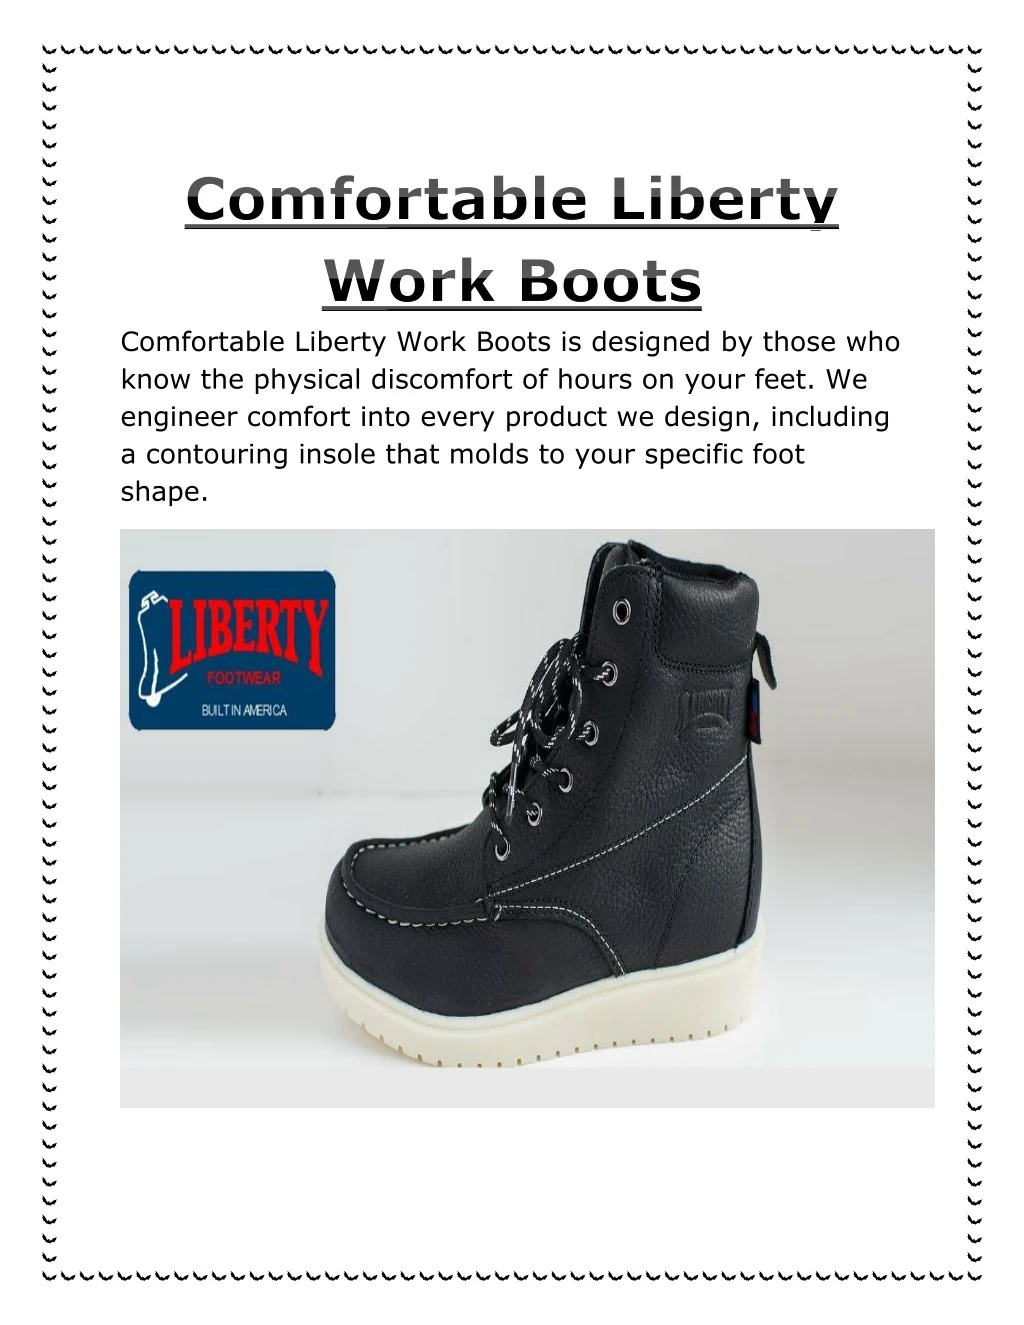 comfortable liberty work boots is designed